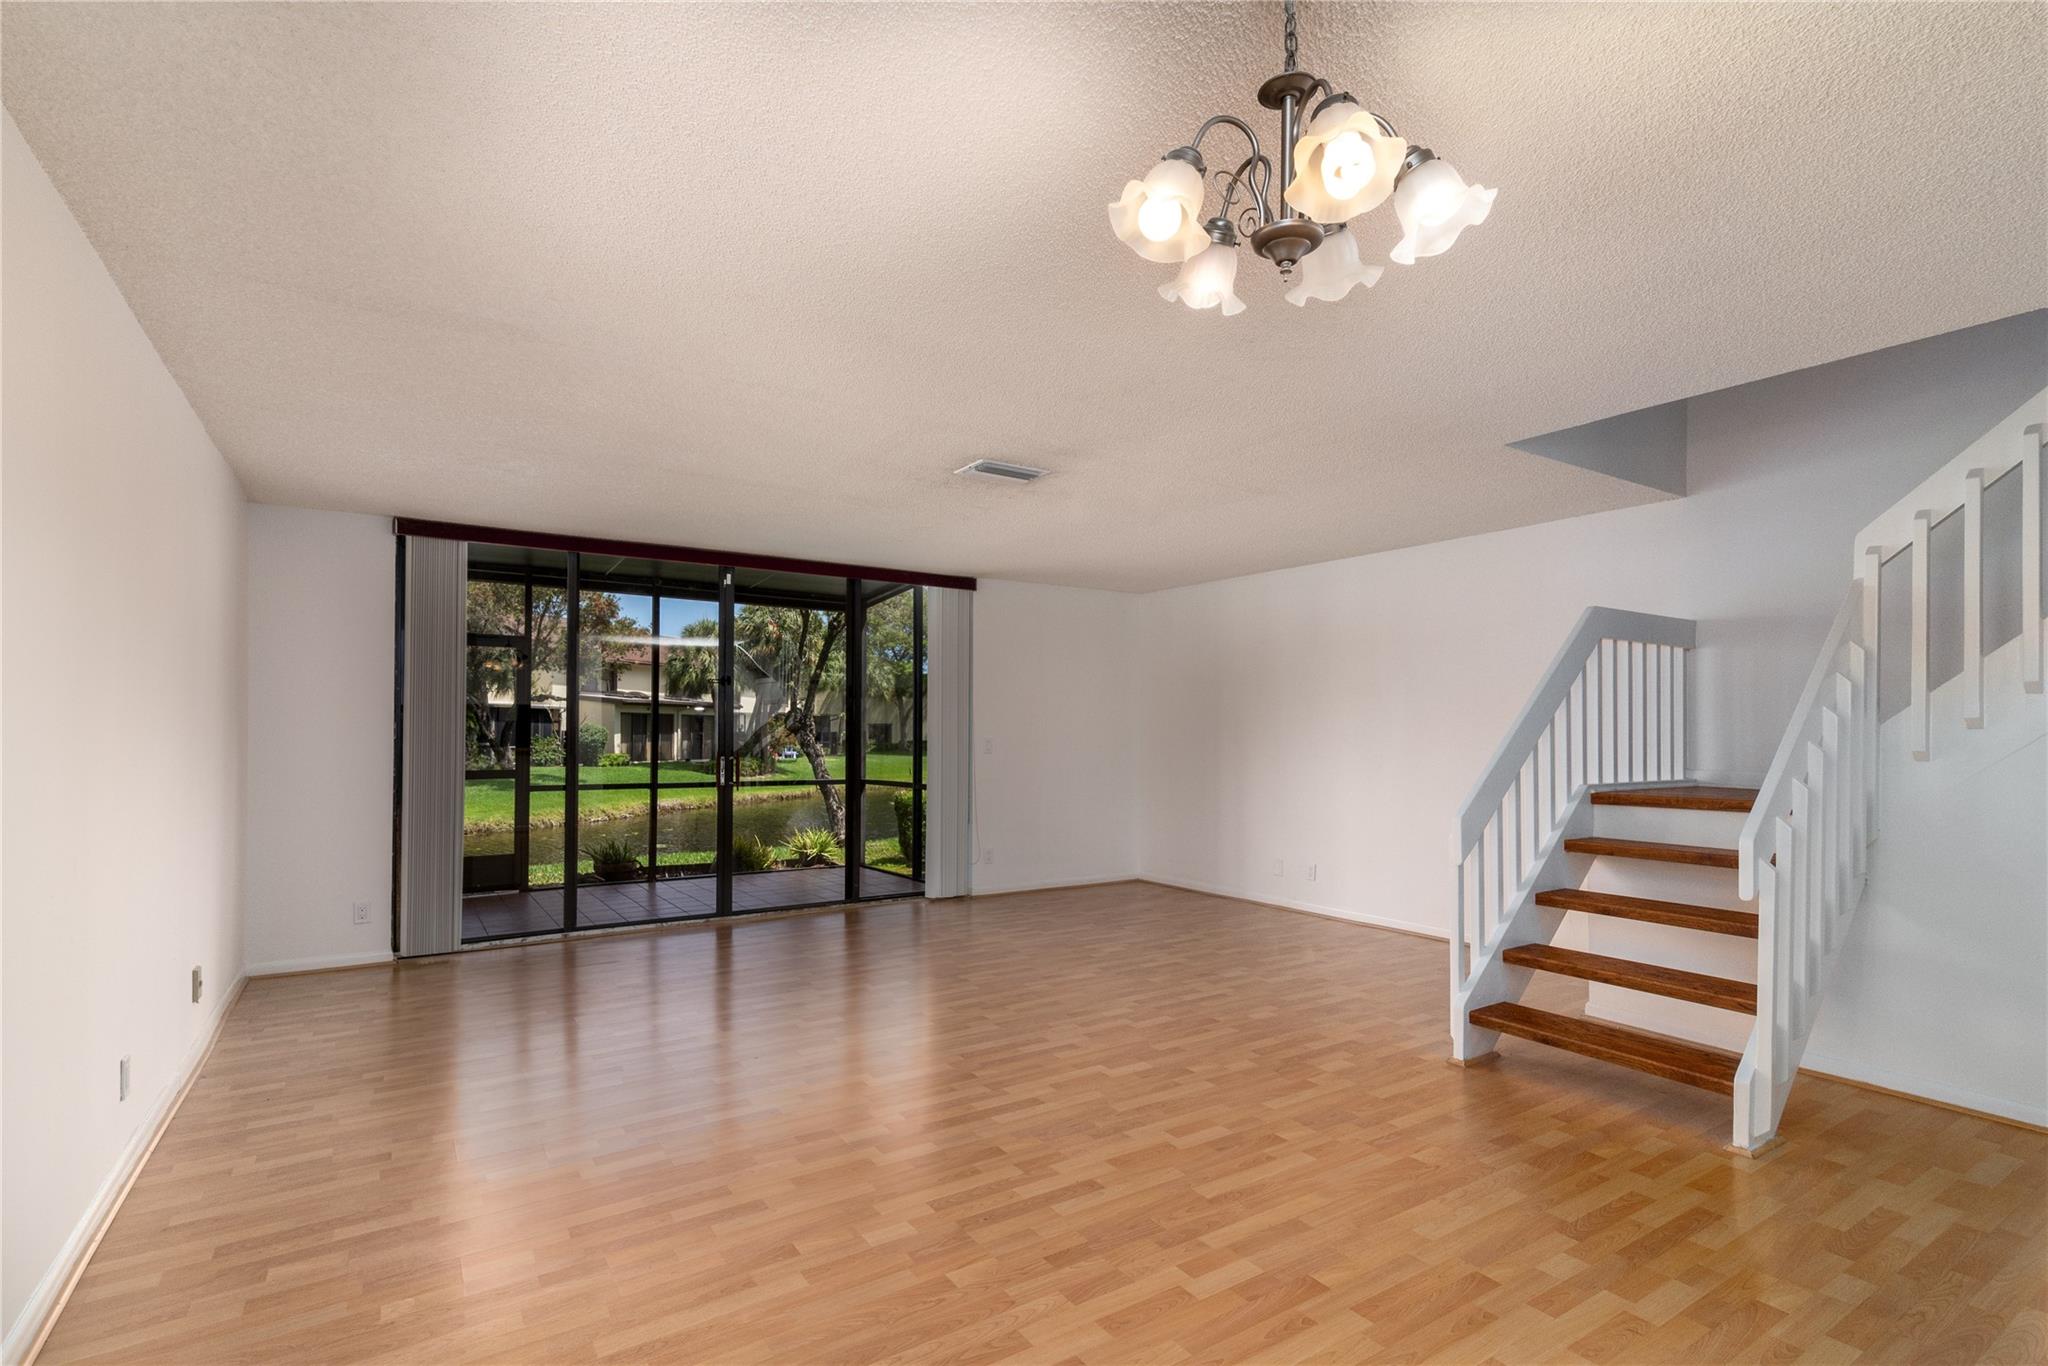 Photo 9 of 28 of 4596 S Carambola Cir townhome